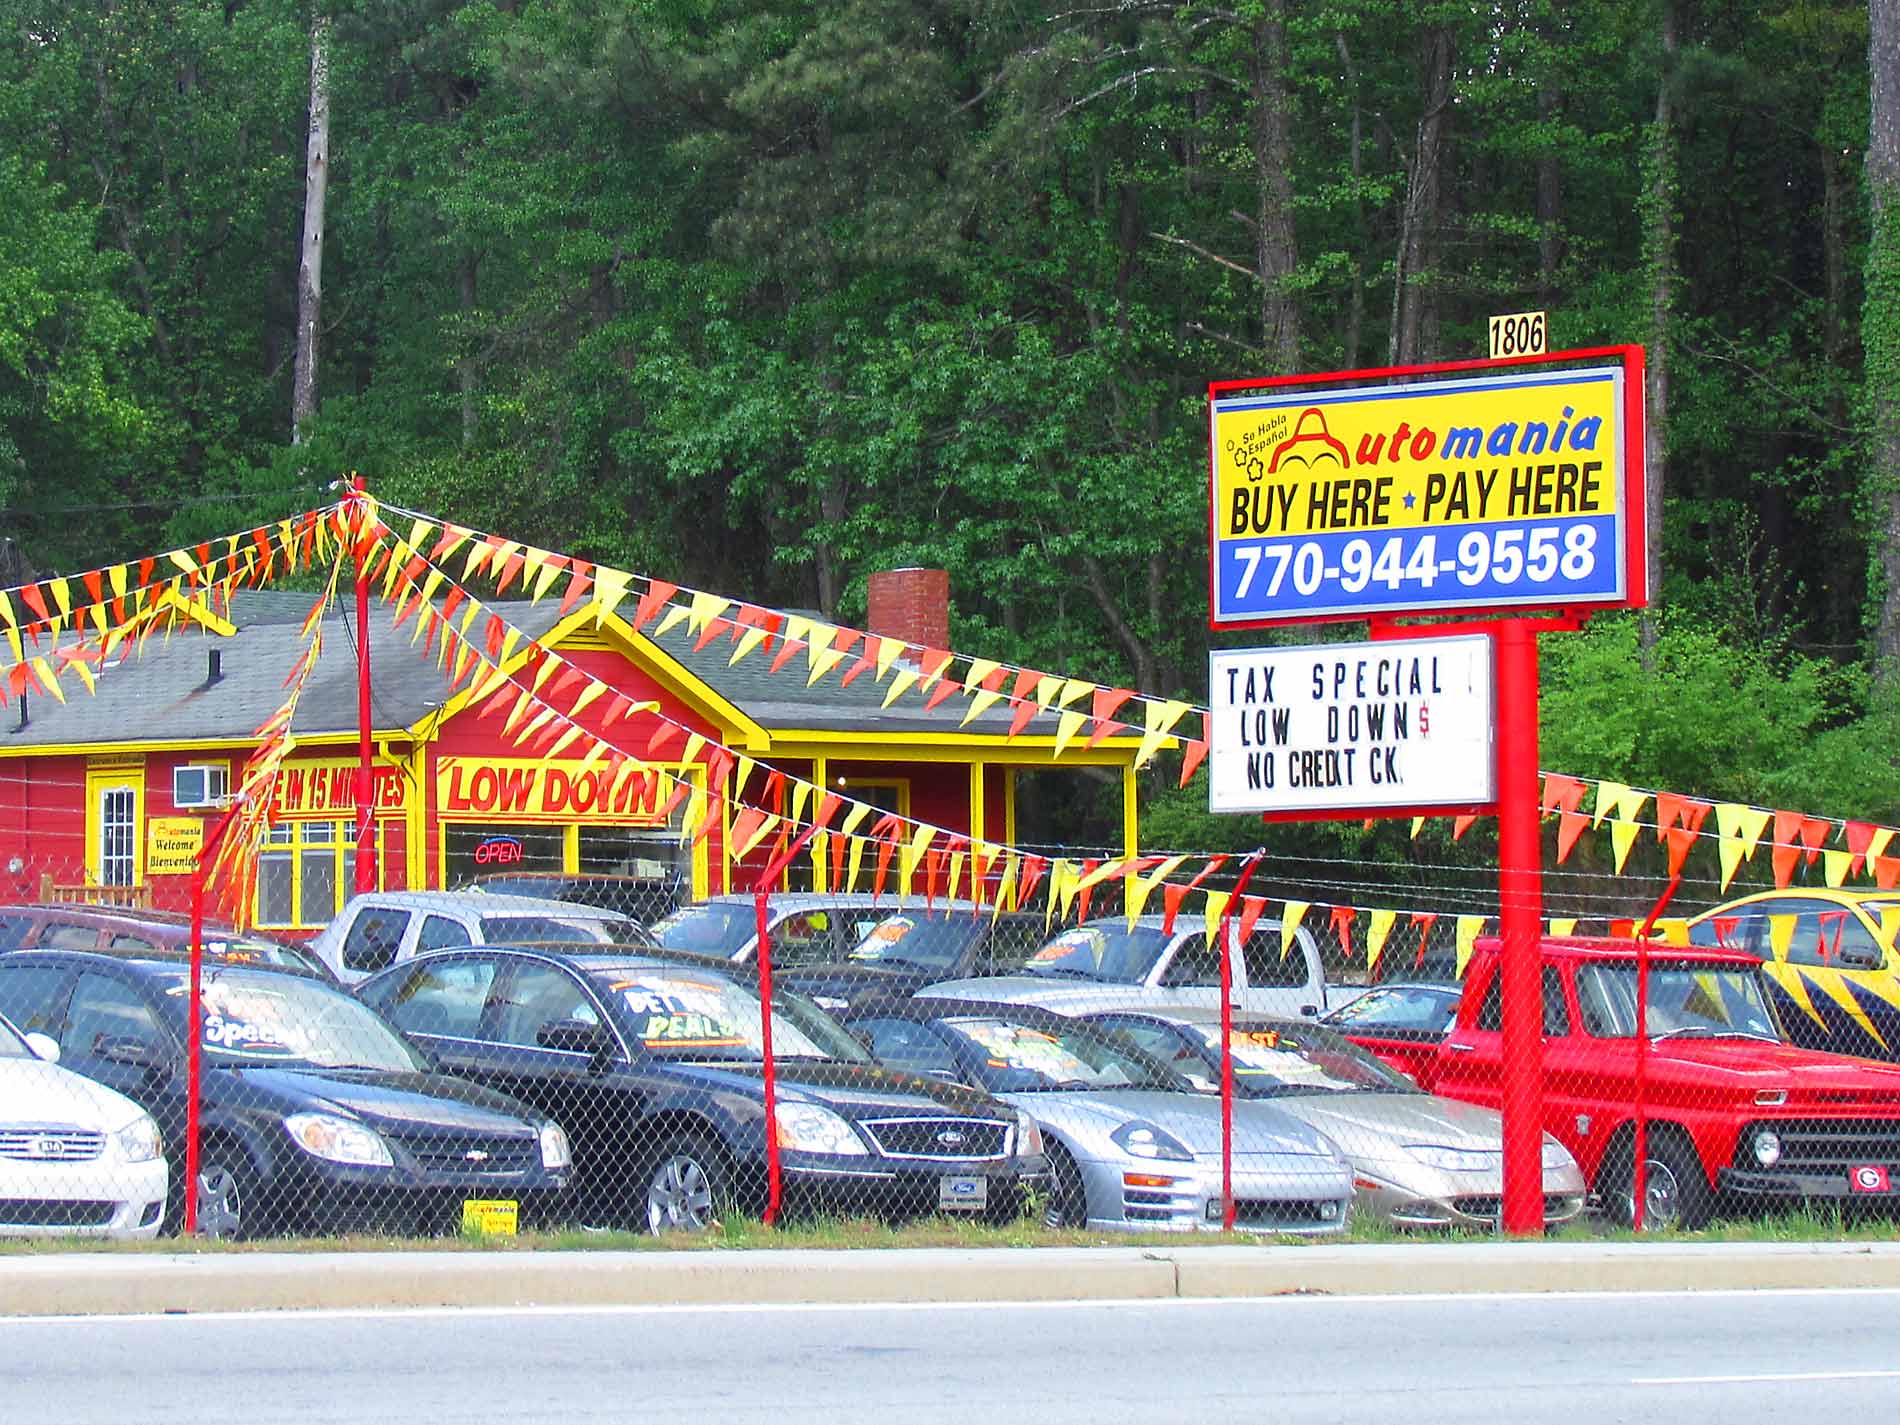 Buy Here Pay Here Car Lots Near Me Open On Sunday - Car Sale and Rentals